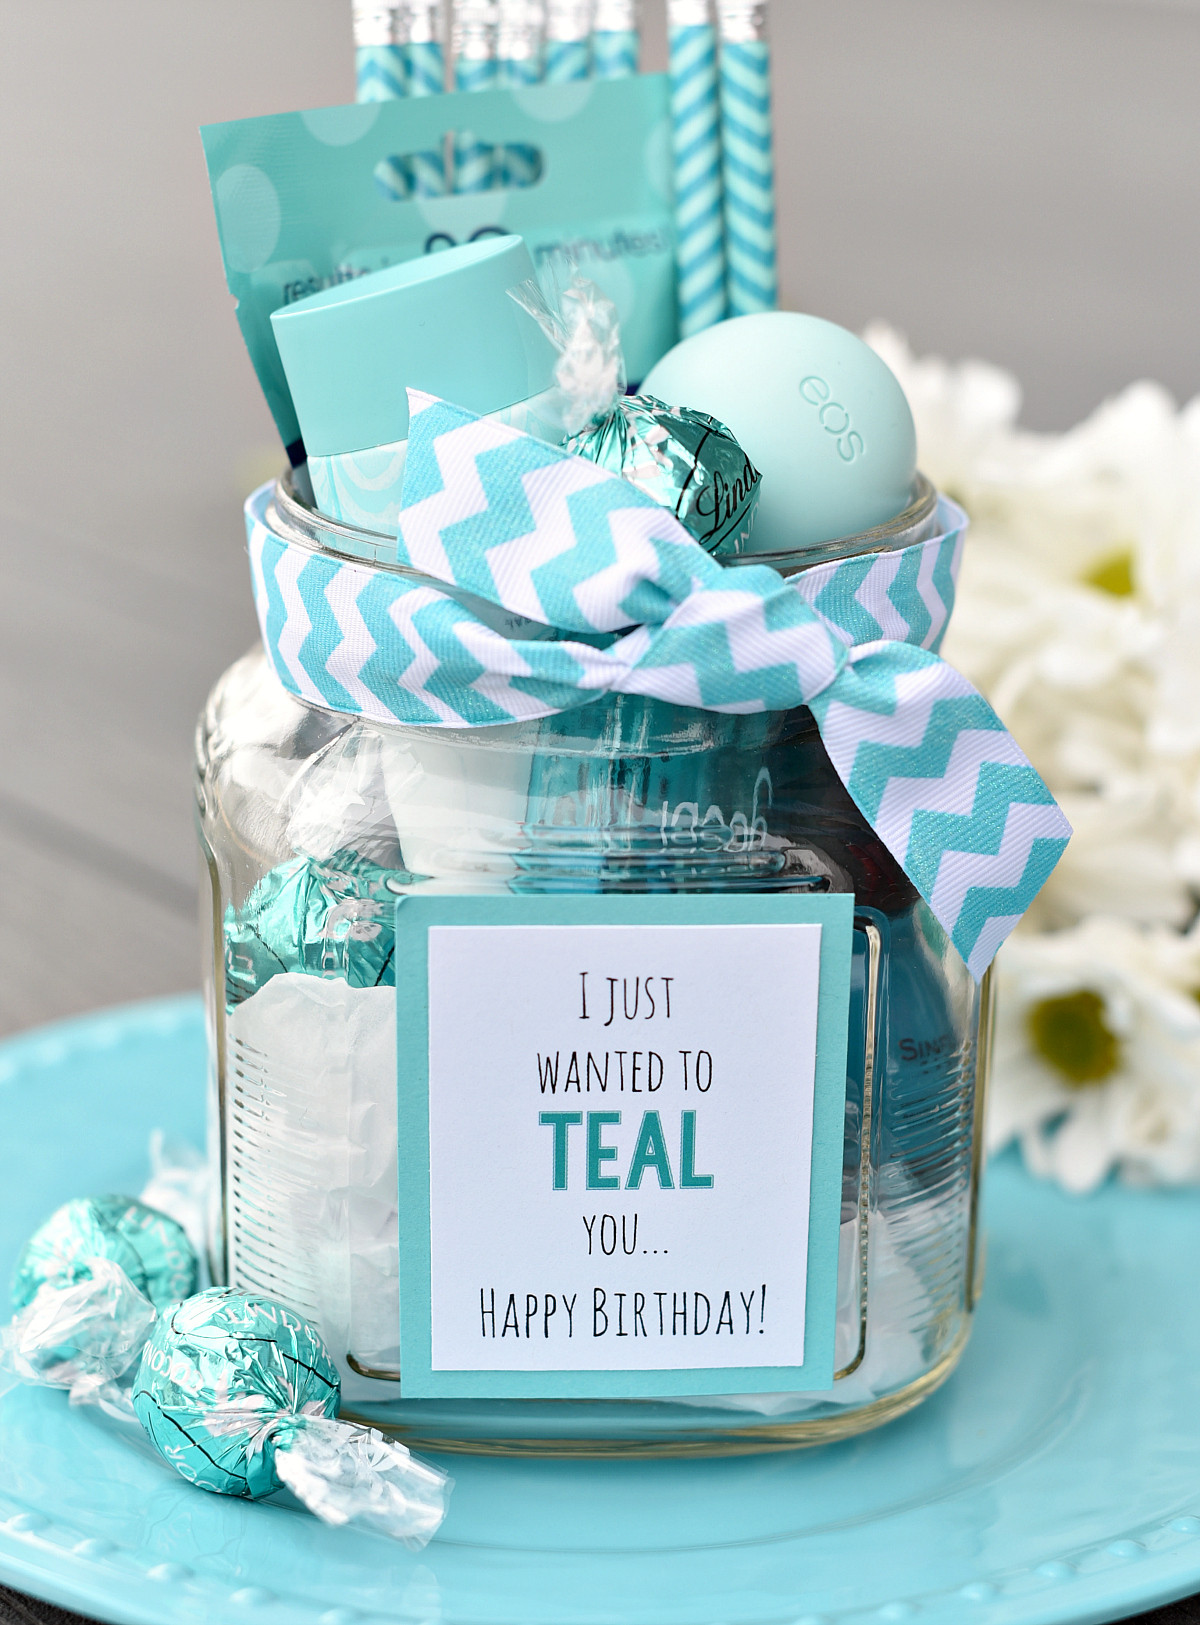 Best Friend Gifts For Birthday
 Teal Birthday Gift Idea for Friends – Fun Squared